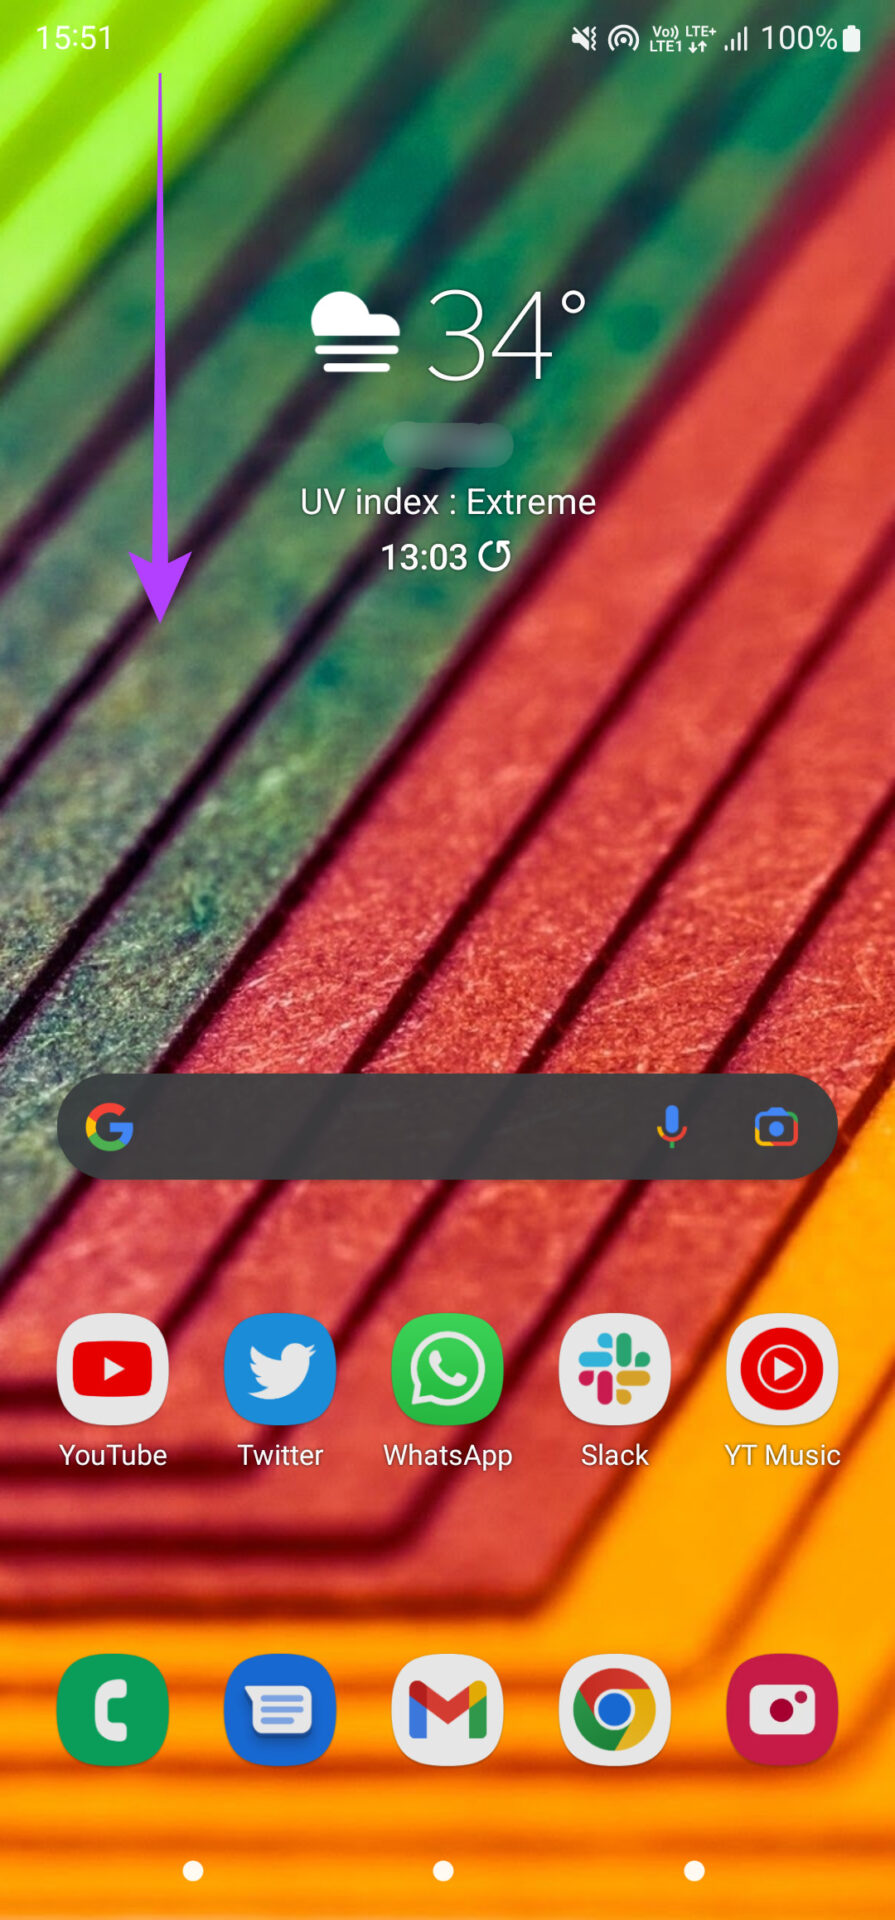 notification center on Android